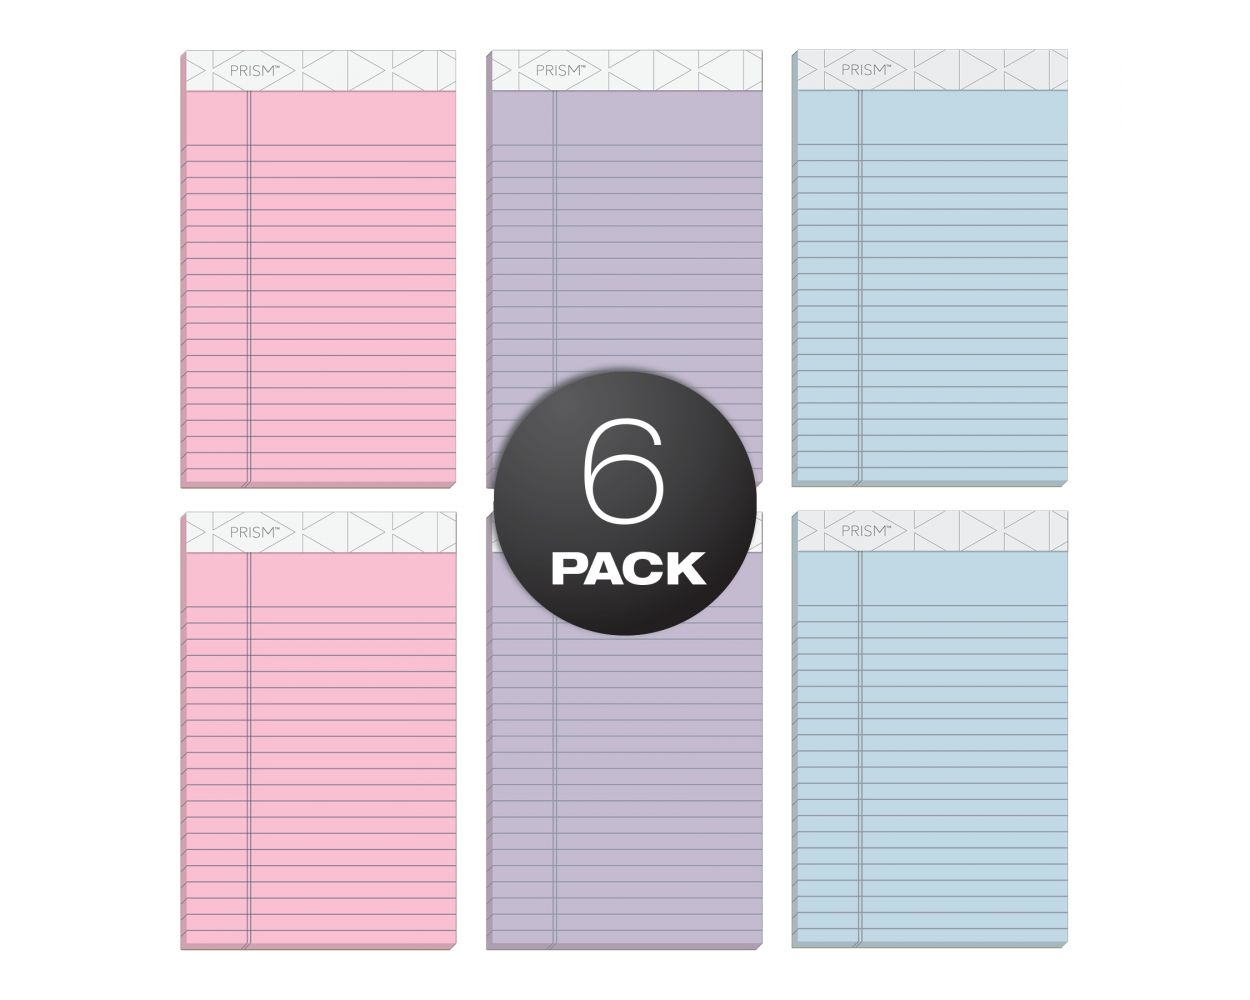 TOPS Prism+ Legal Pad, 5" x 8", Perforated, Assorted Colors: Pink, Orchid,  Blue, Narrow Rule, 50 SH/PD, 6 PD/PK